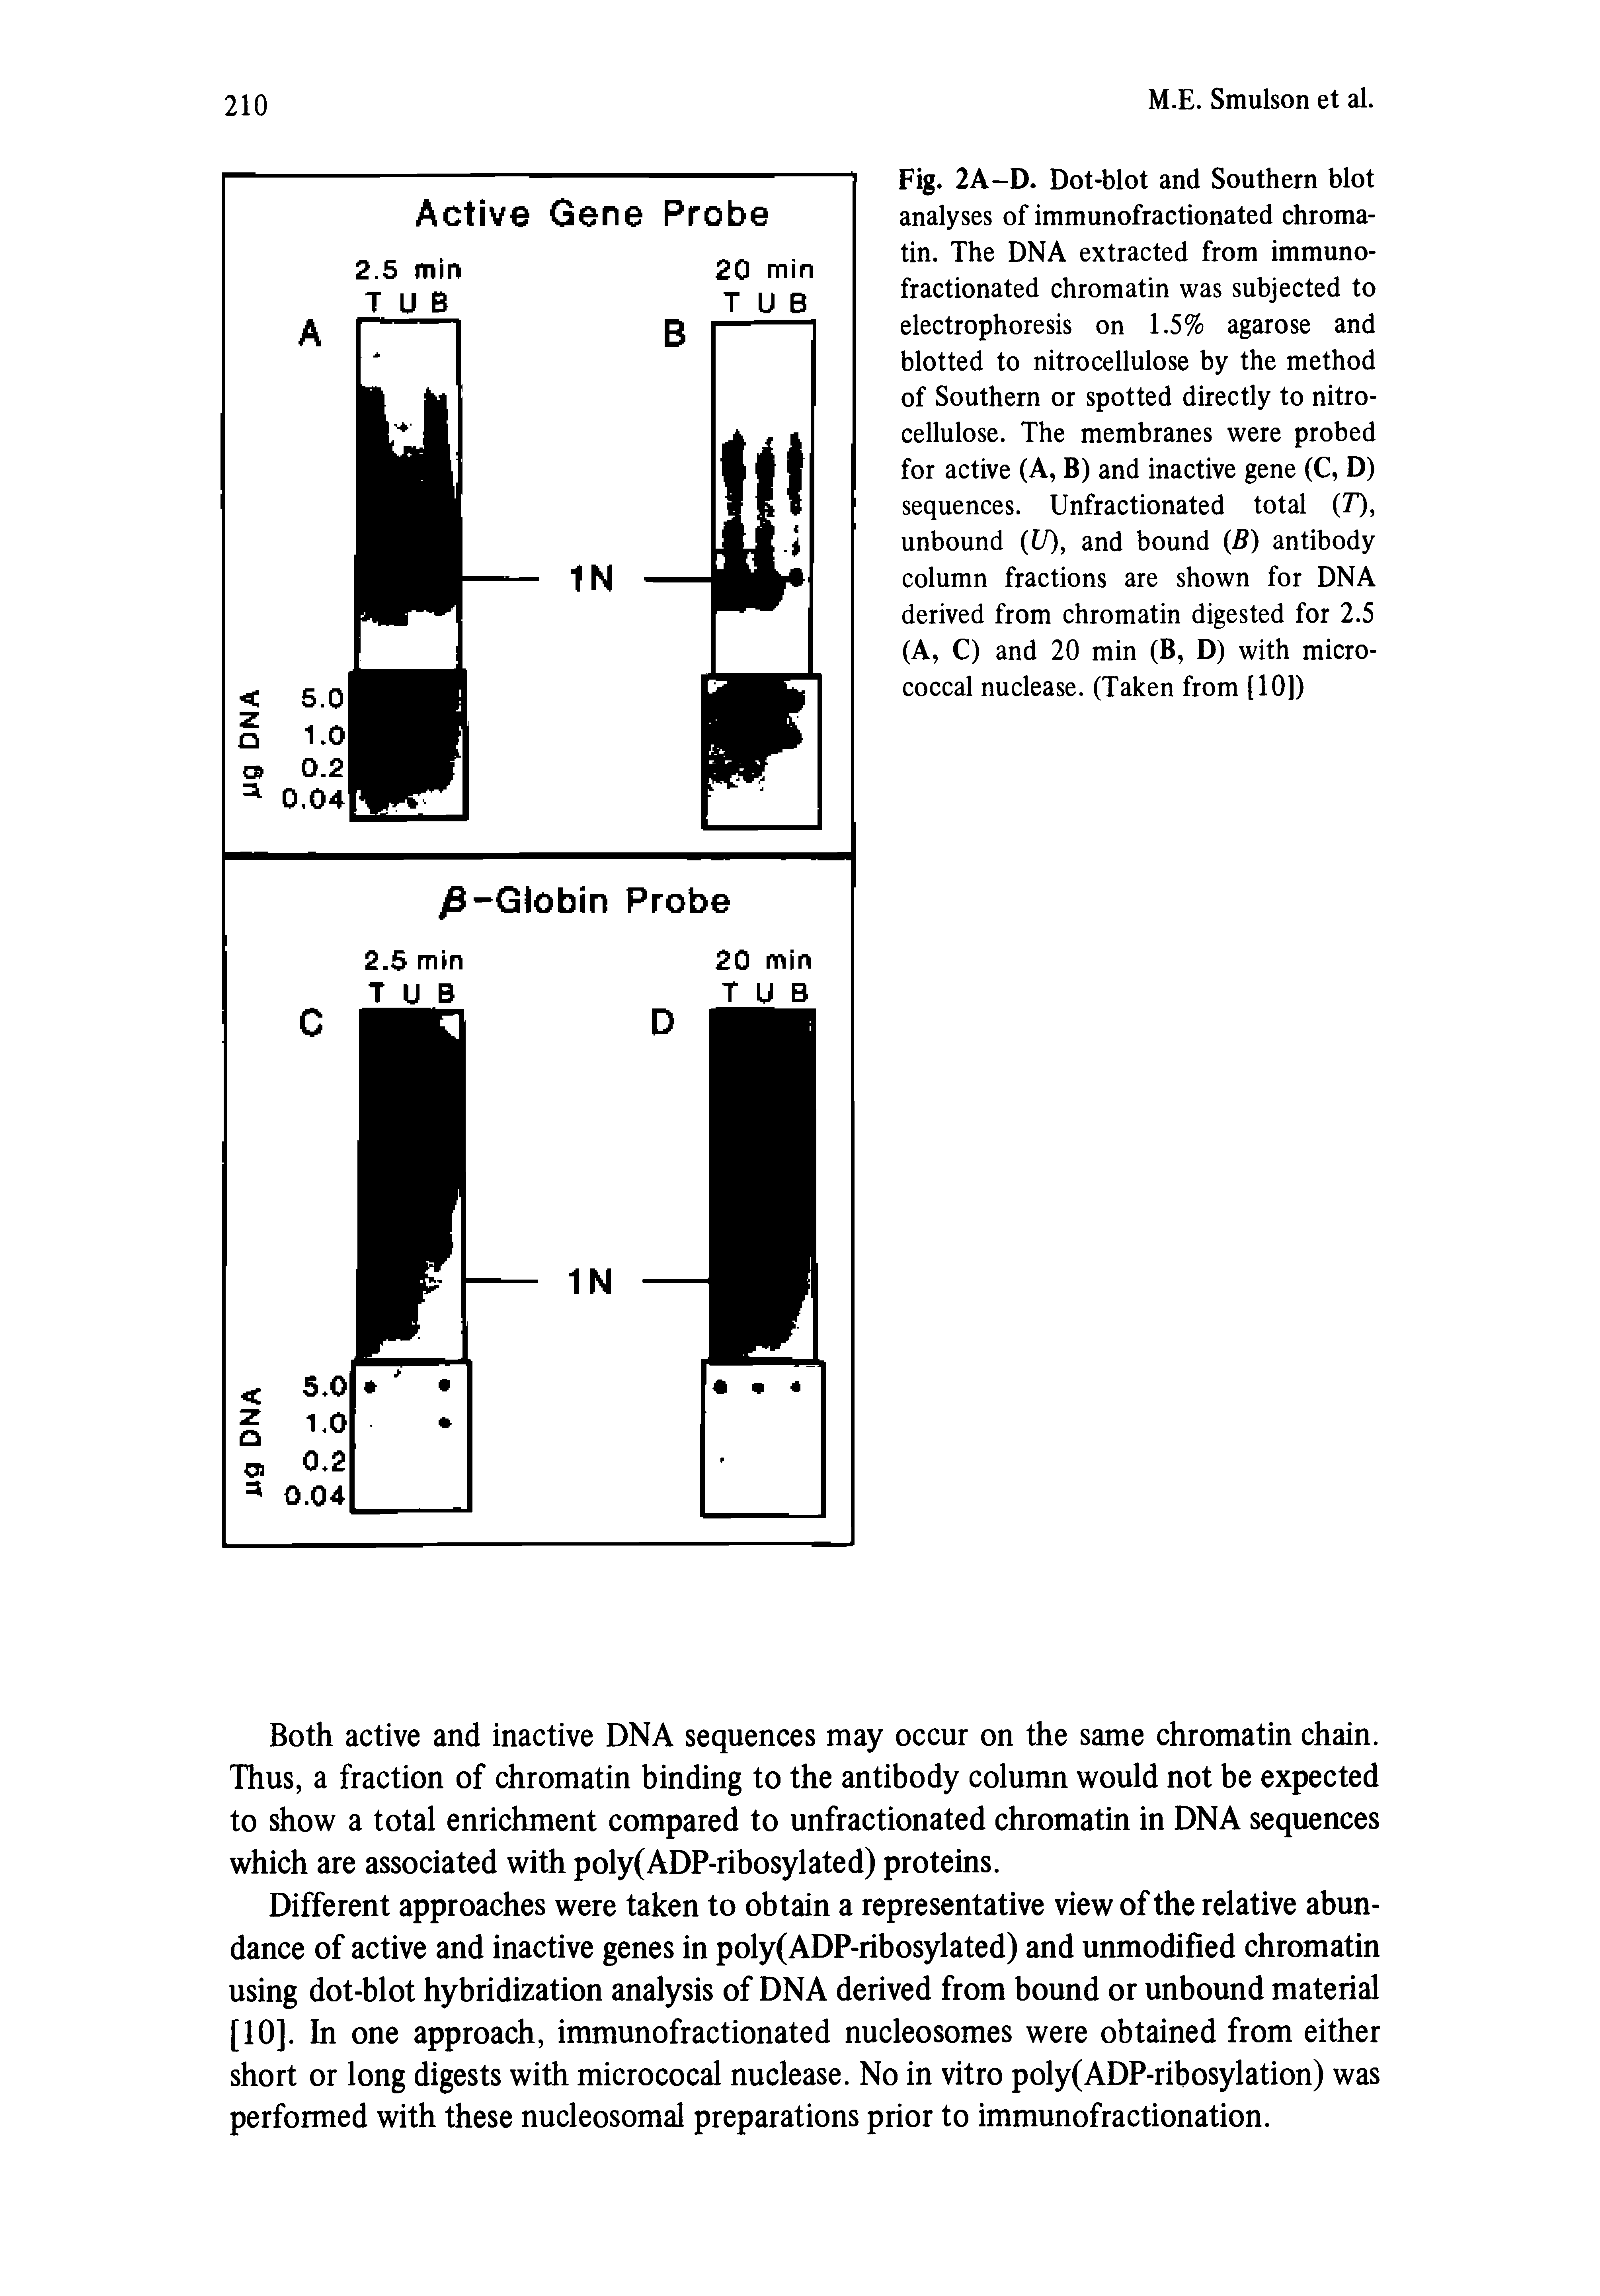 Fig. 2A-D. Dot-blot and Southern blot analyses of immunofractionated chromatin. The DNA extracted from immunofractionated chromatin was subjected to electrophoresis on 1.5% agarose and blotted to nitrocellulose by the method of Southern or spotted directly to nitrocellulose. The membranes were probed for active (A, B) and inactive gene (C, D) sequences. Unfractionated total T), unbound (U), and bound B) antibody column fractions are shown for DNA derived from chromatin digested for 2.5 (A, C) and 20 min (B, D) with micrococcal nuclease. (Taken from [10])...